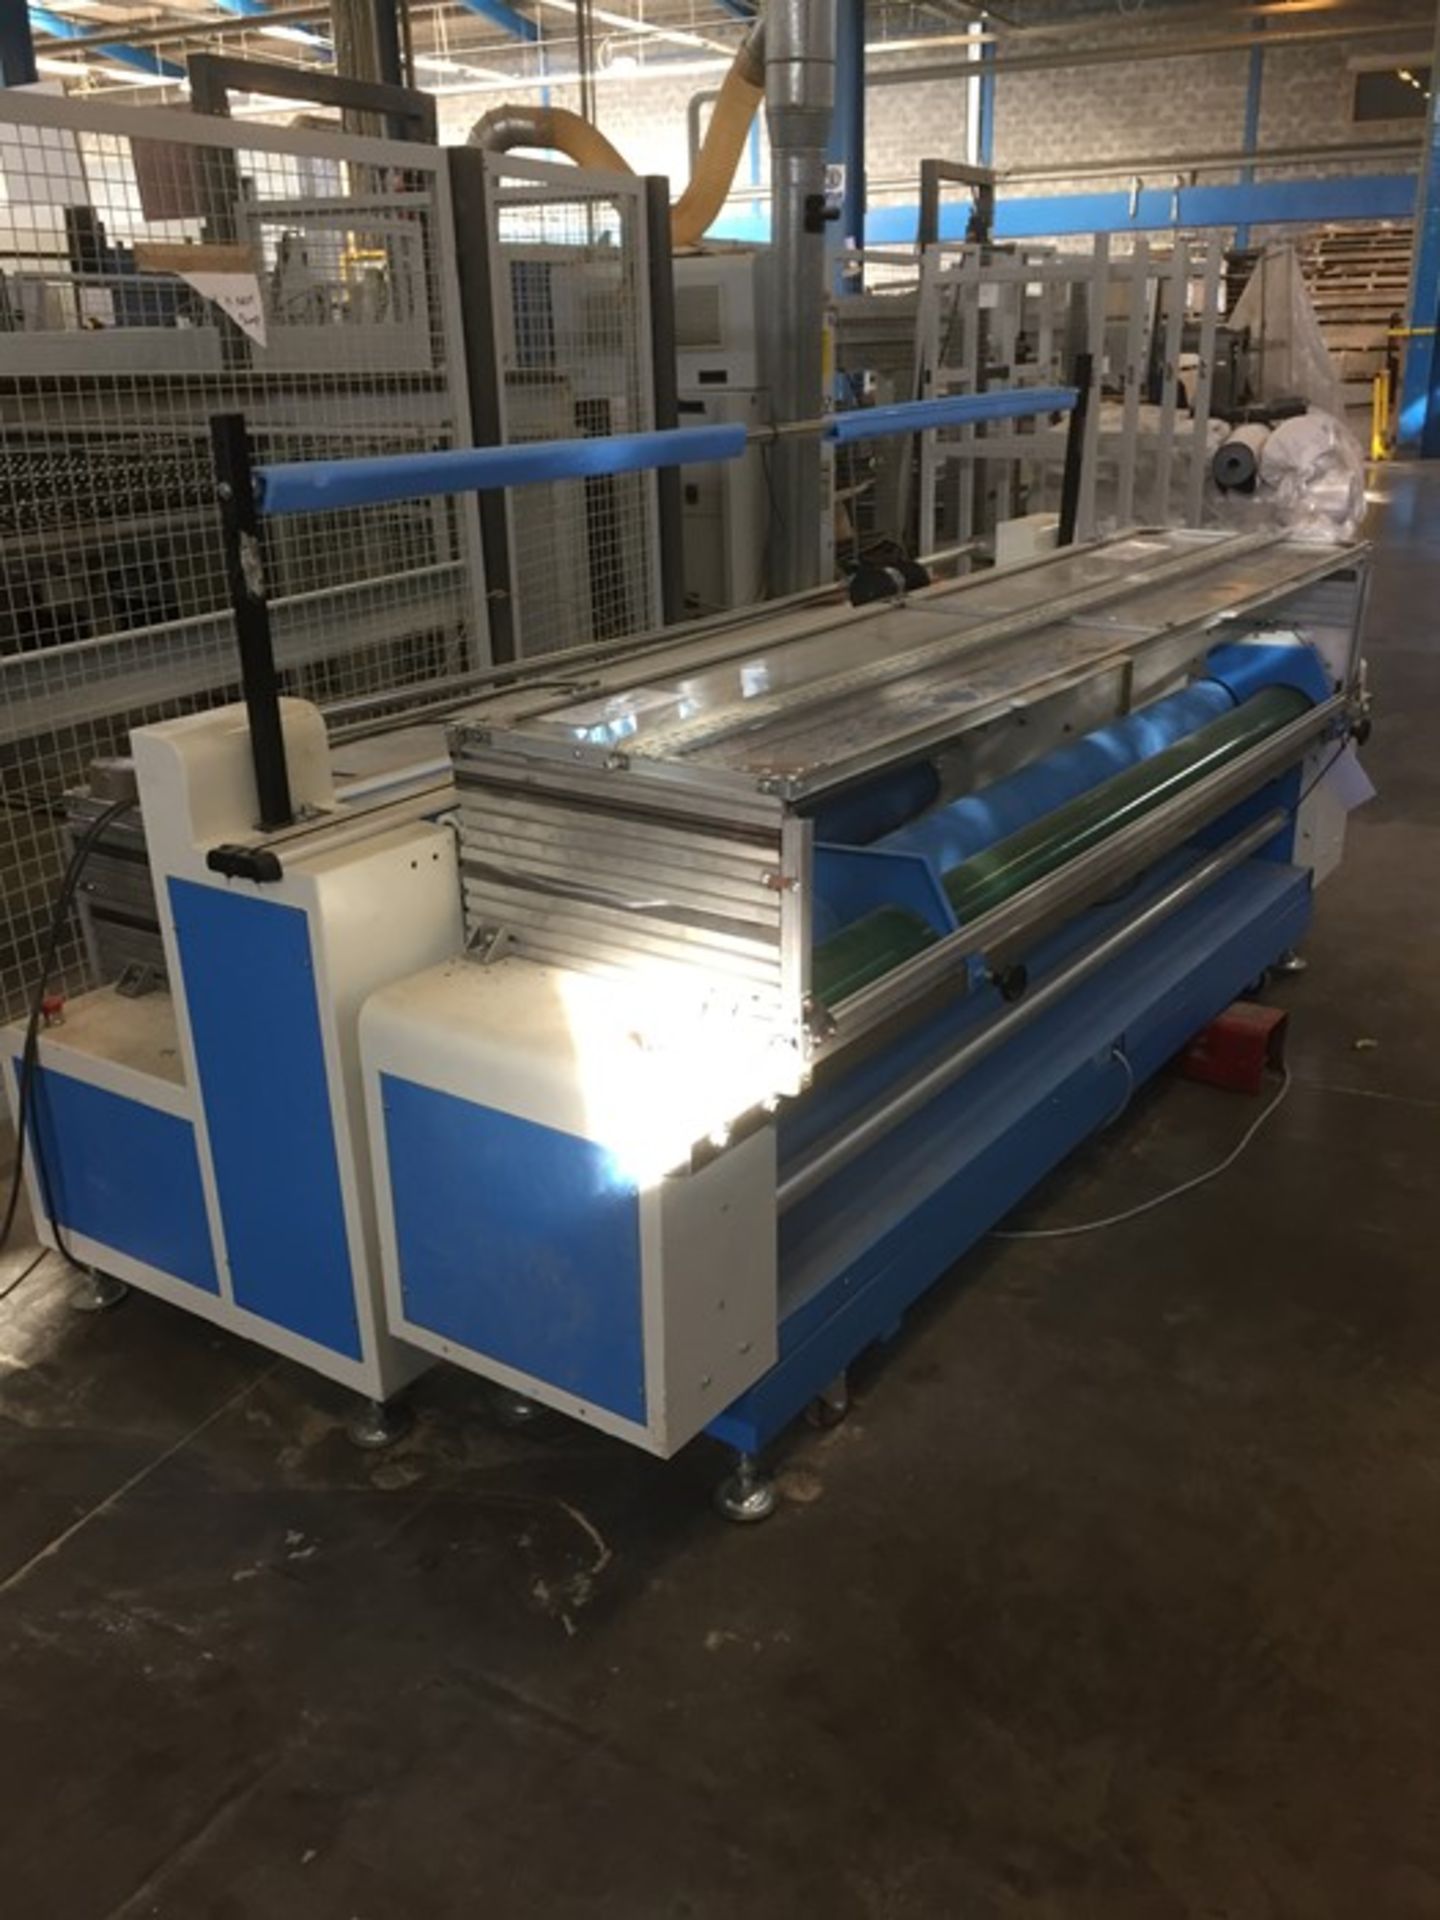 JD Automatic rolling fabric machine (240v) Model No. YFD-2100 F11(2019) Capacity 2100mm ** This